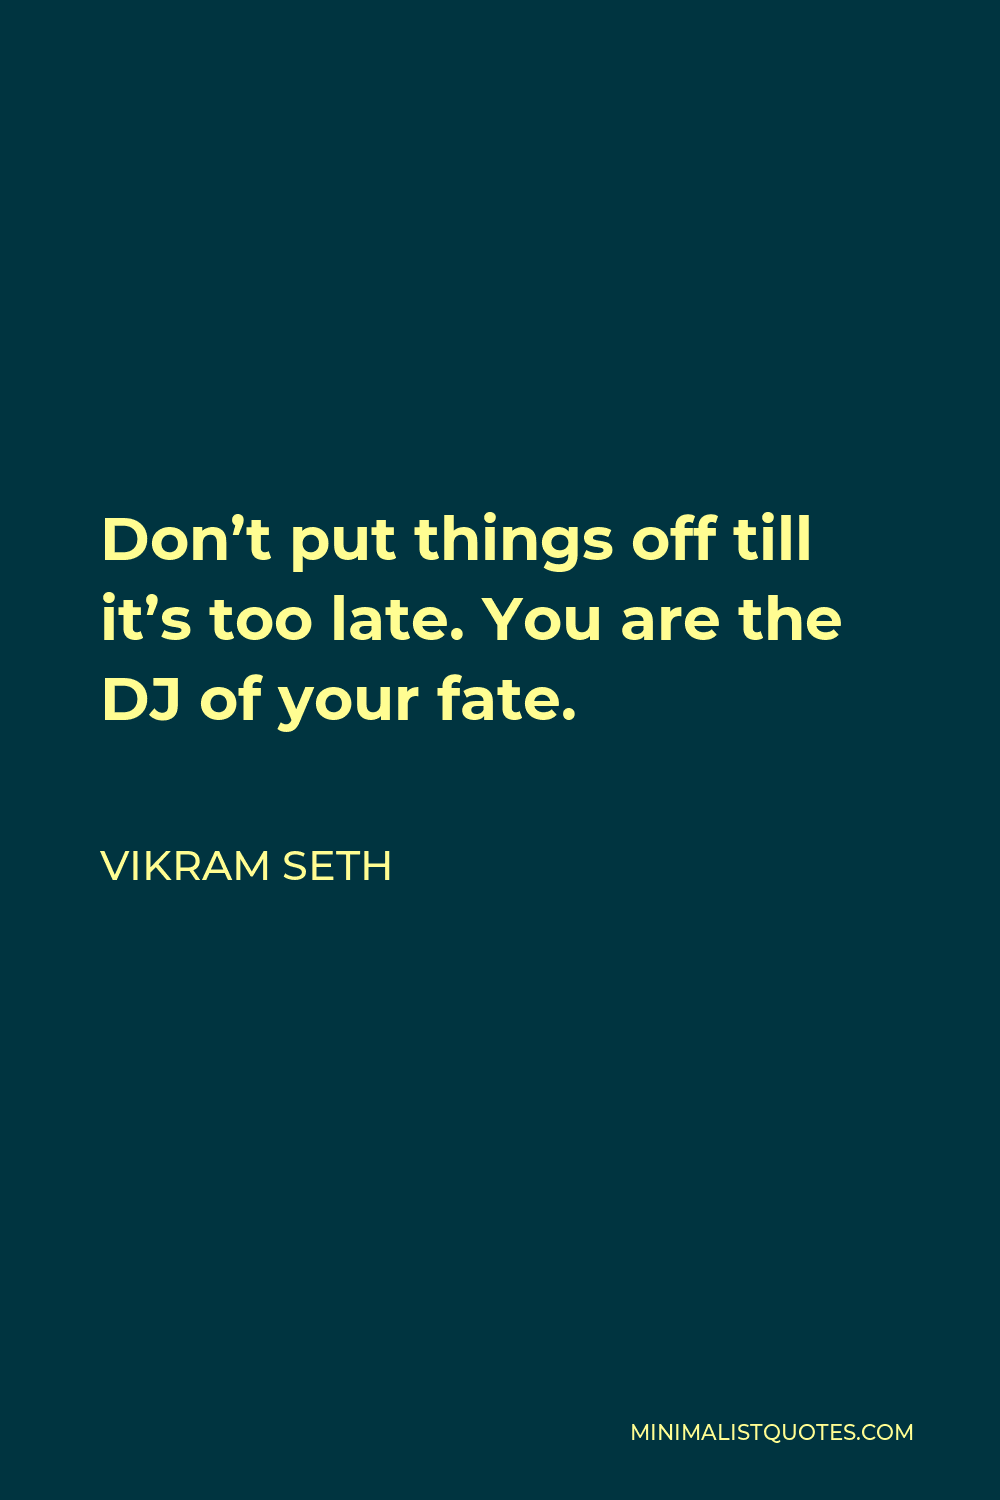 Vikram Seth Quote - Don’t put things off till it’s too late. You are the DJ of your fate.